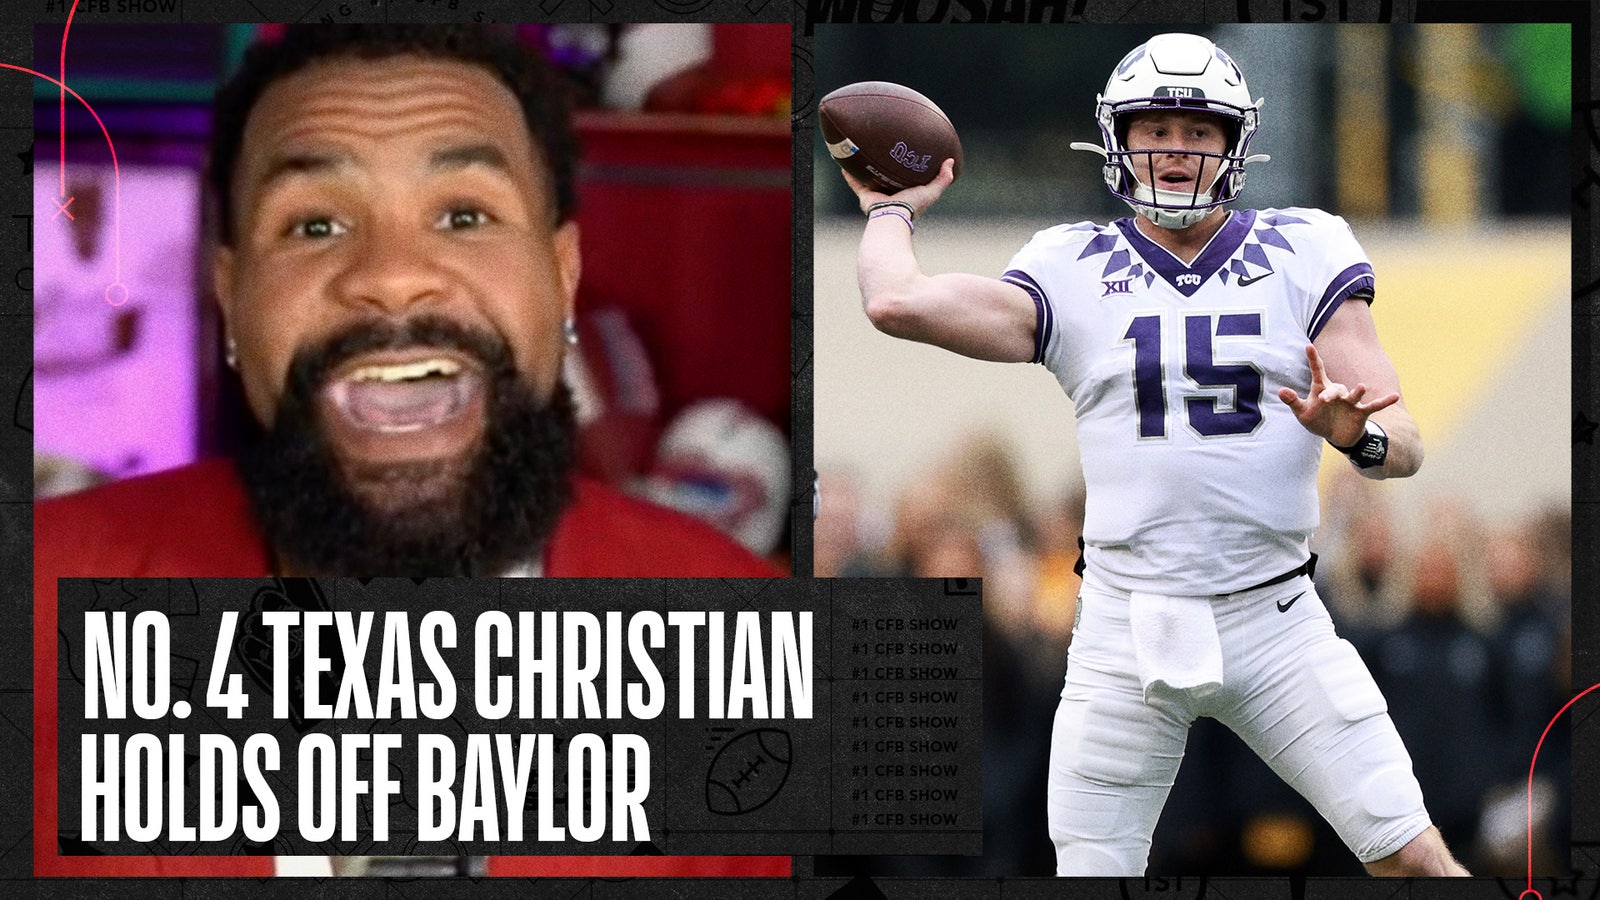 #4 Texas Christian stuns Baylor 29-28 |  The number one college football show